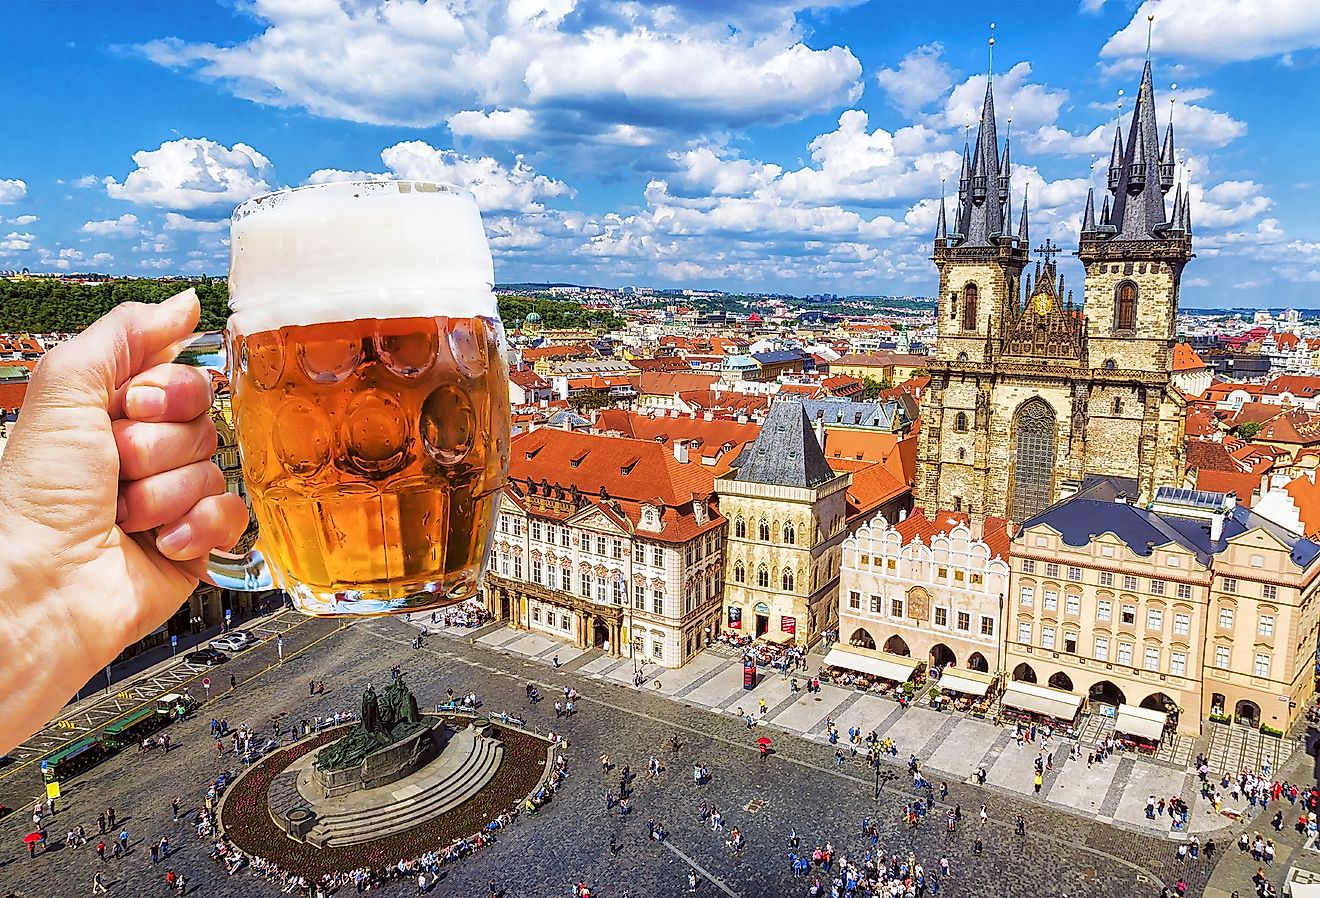 Mug of beer on the background of the Old Town Square in Prague, Czechia.